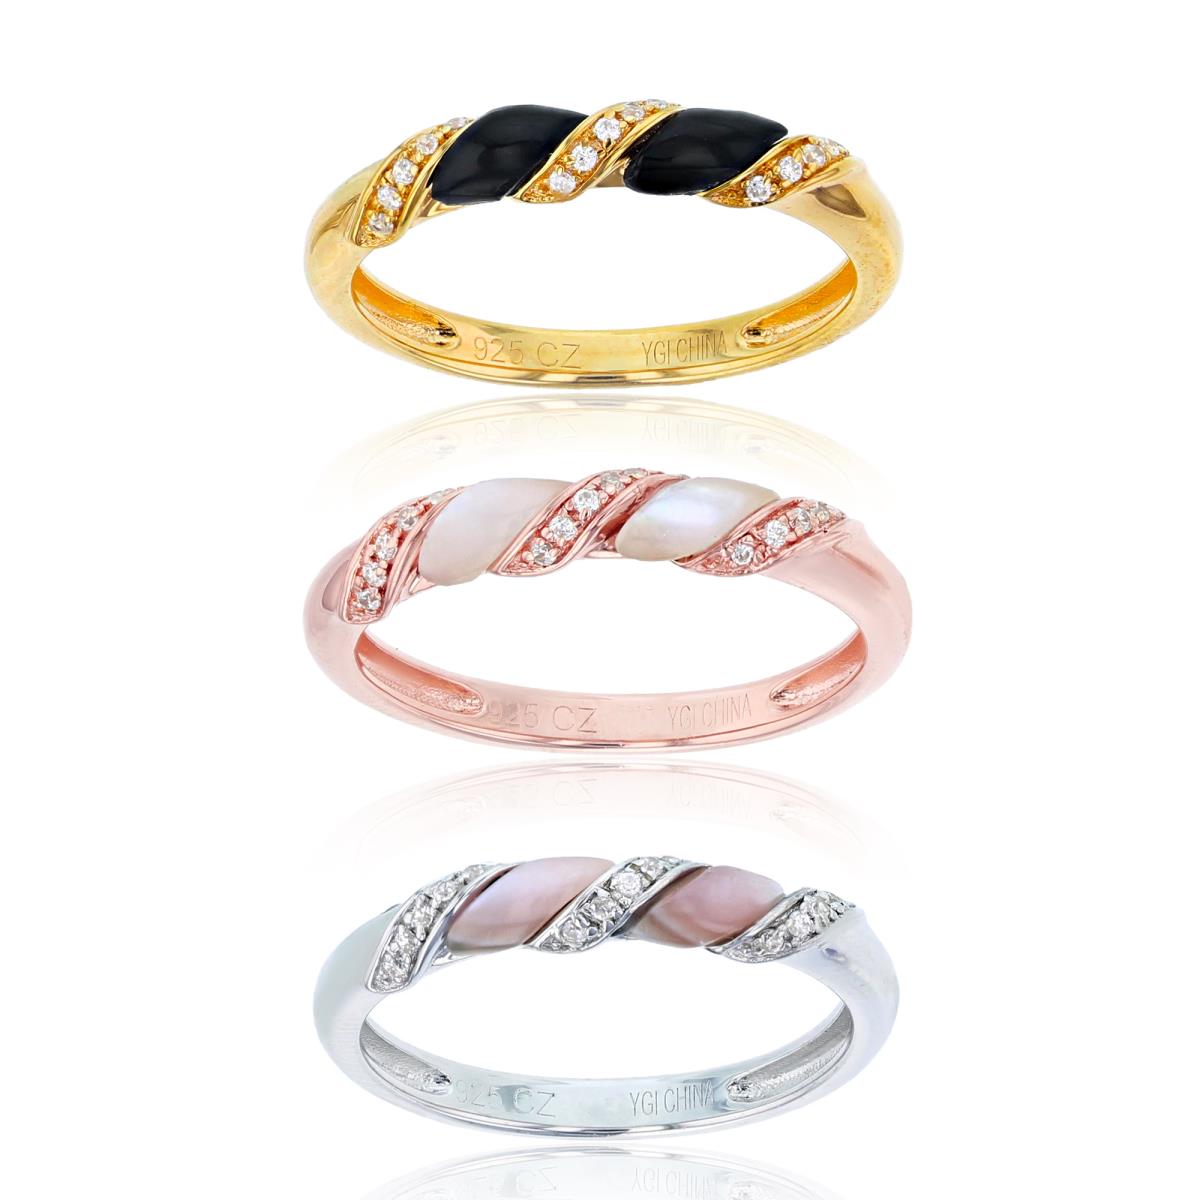 Sterling Silver 1Micron 14K Tricolor Gold Rnd CZ & Onyx/White and Pink Mop 3-Stackable Rings